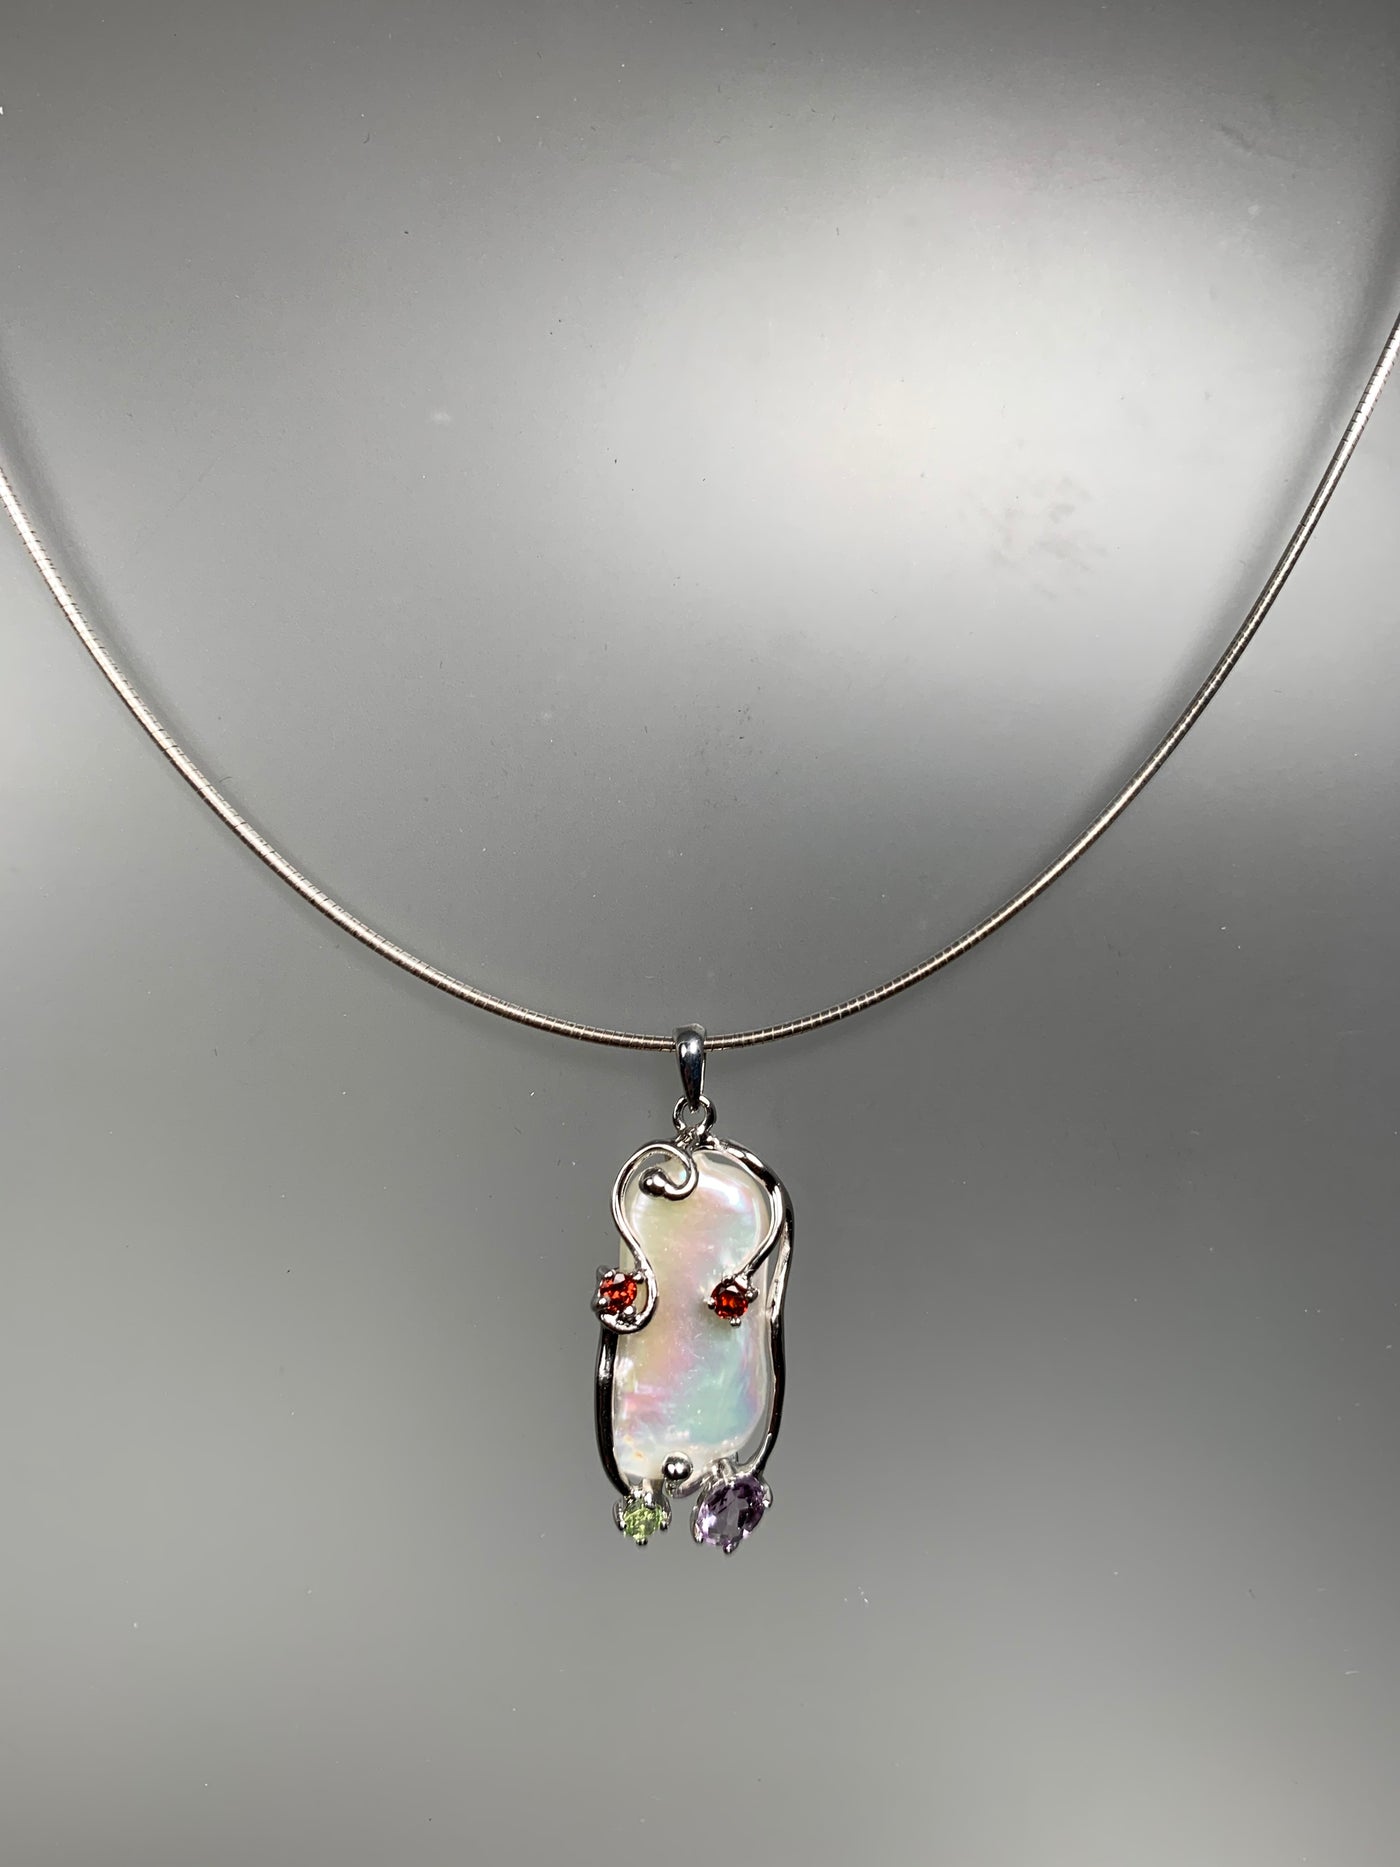 Rectangular Pearl Pendant with Amethyst Garnet Peridot Accent in Silver